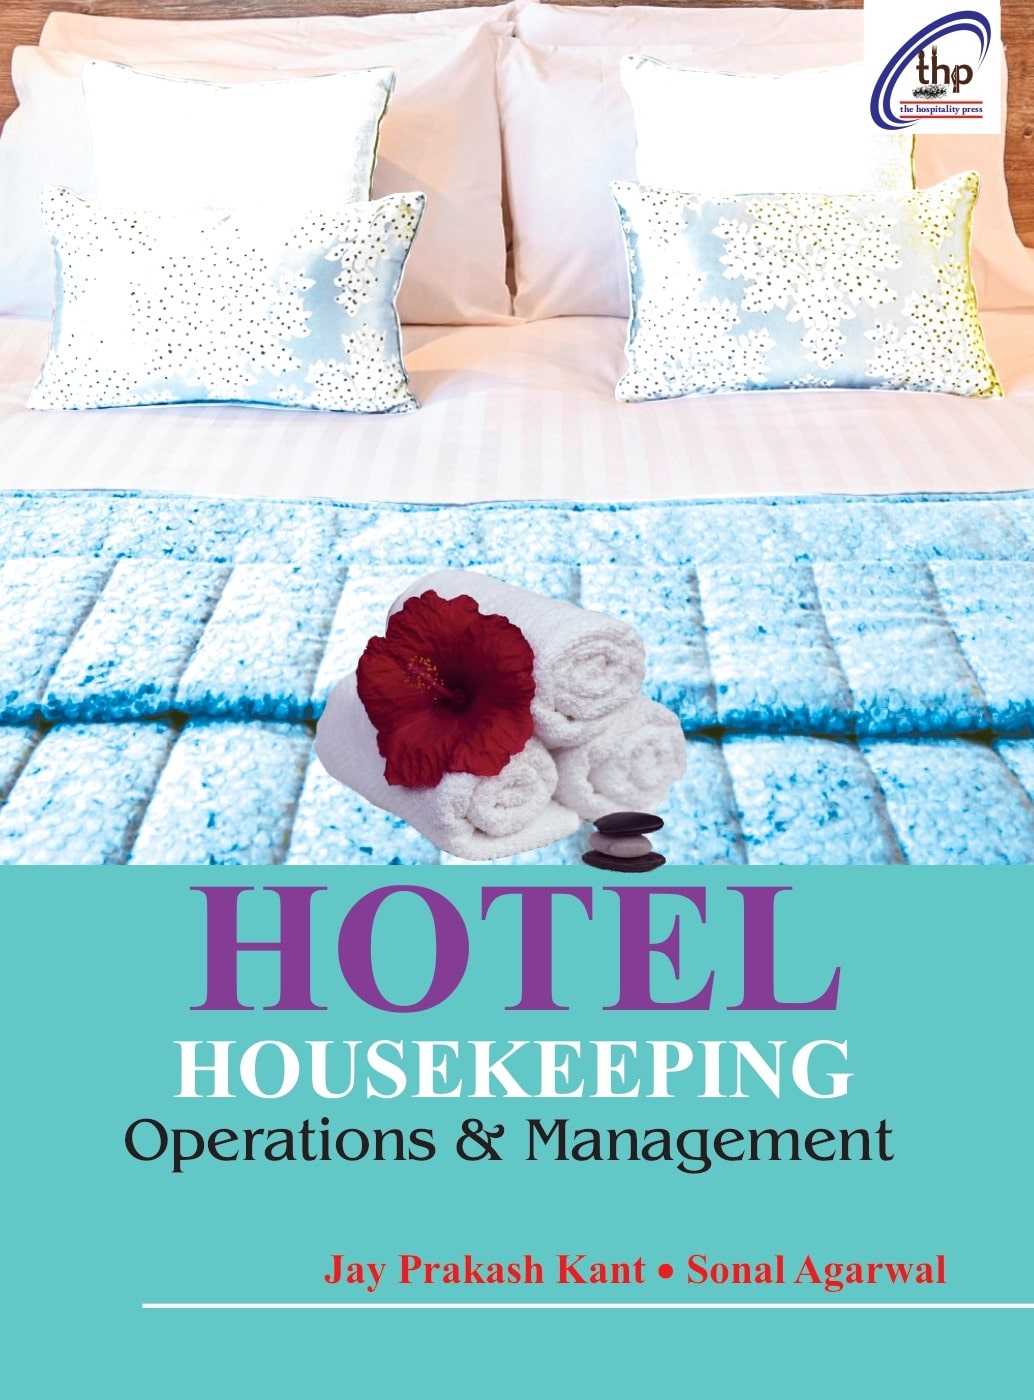 Hotel Housekeeping: Operations and Management